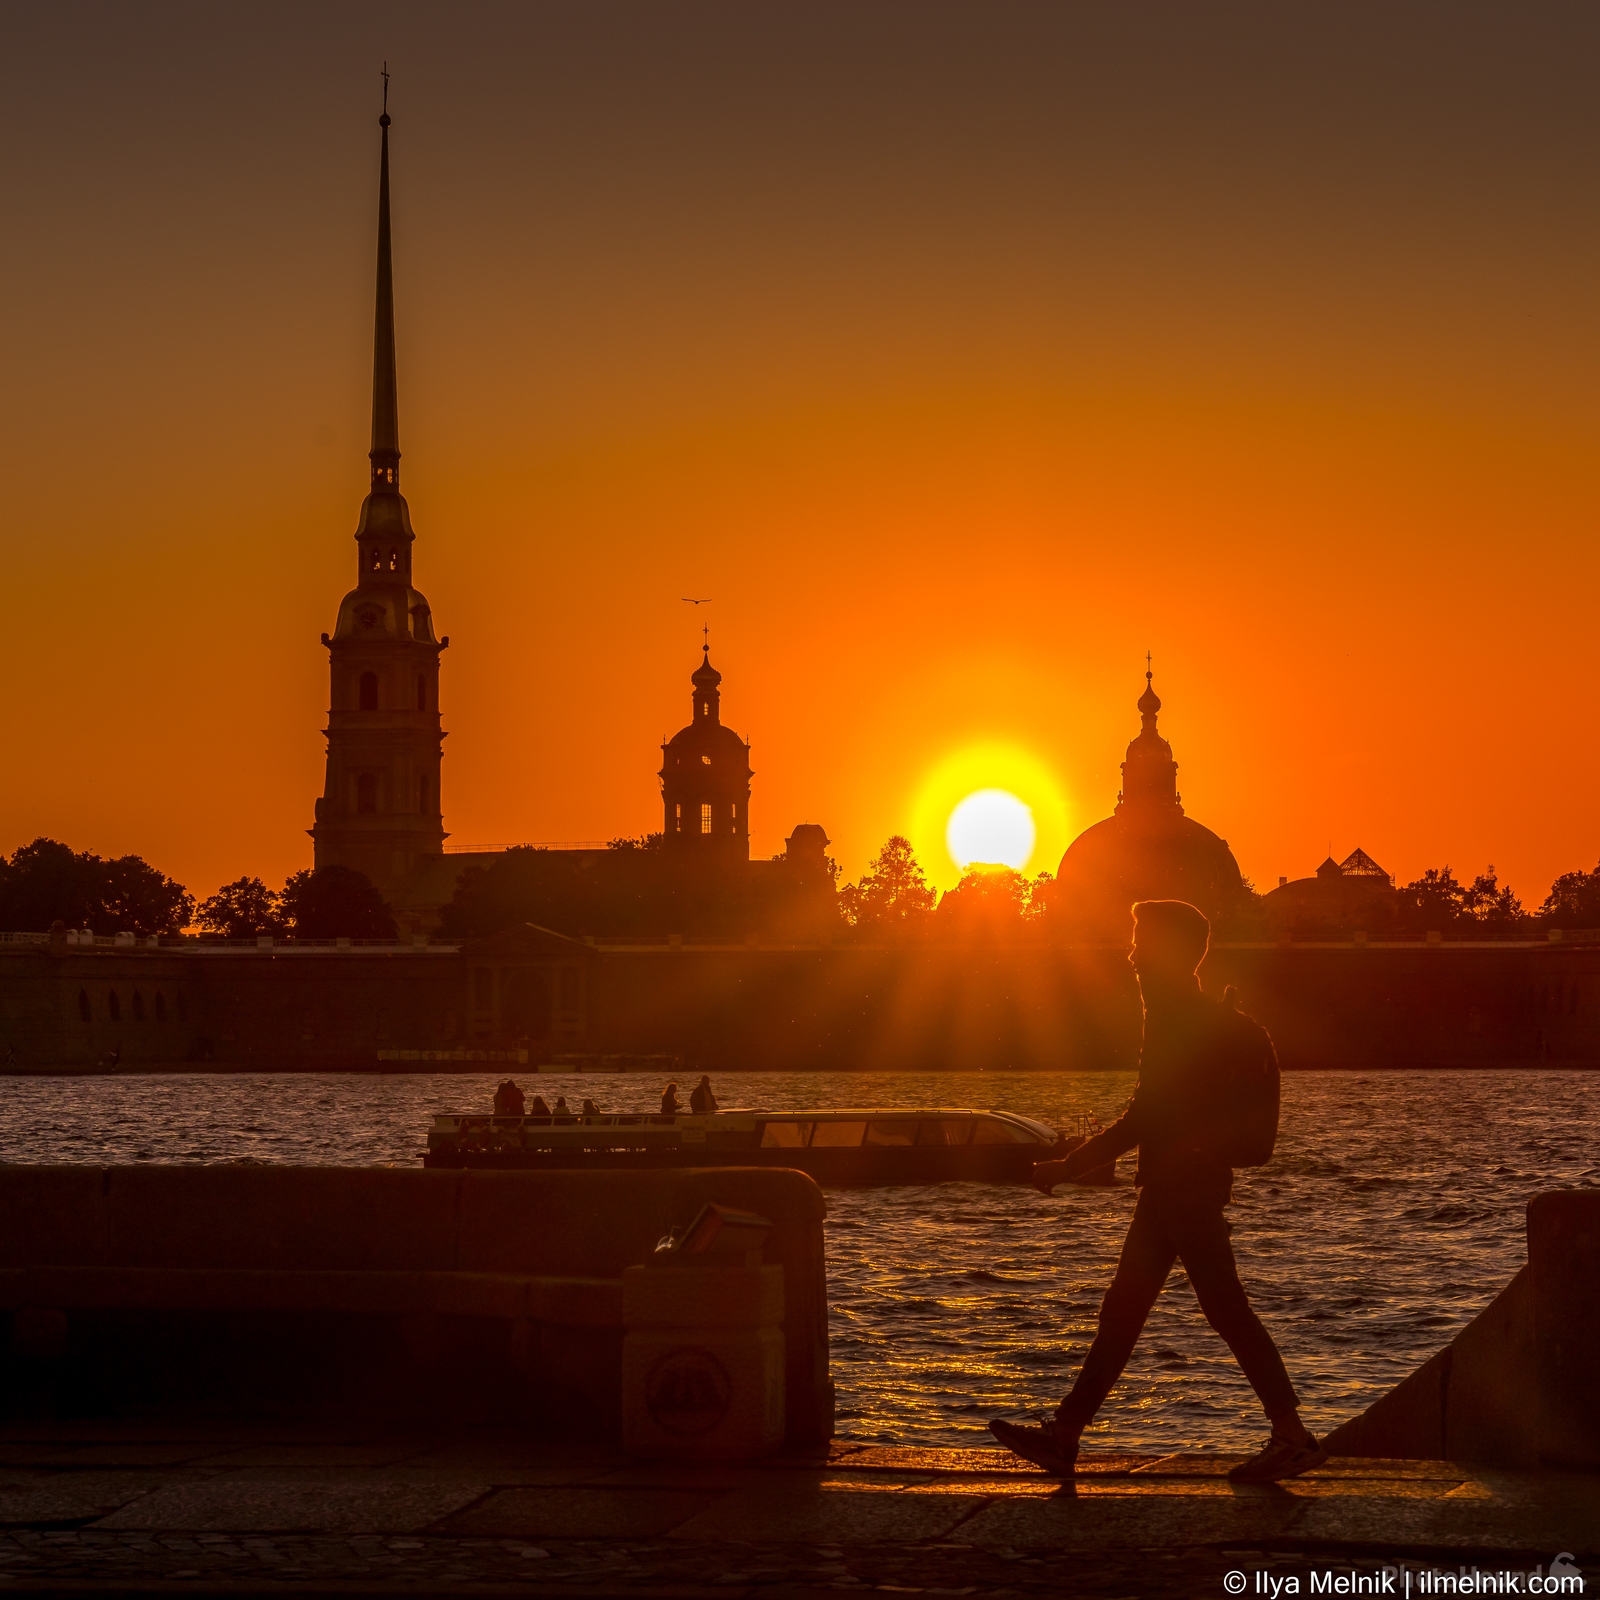 Image of Peter & Paul Fortress from Palace Embankment by Ilya Melnik